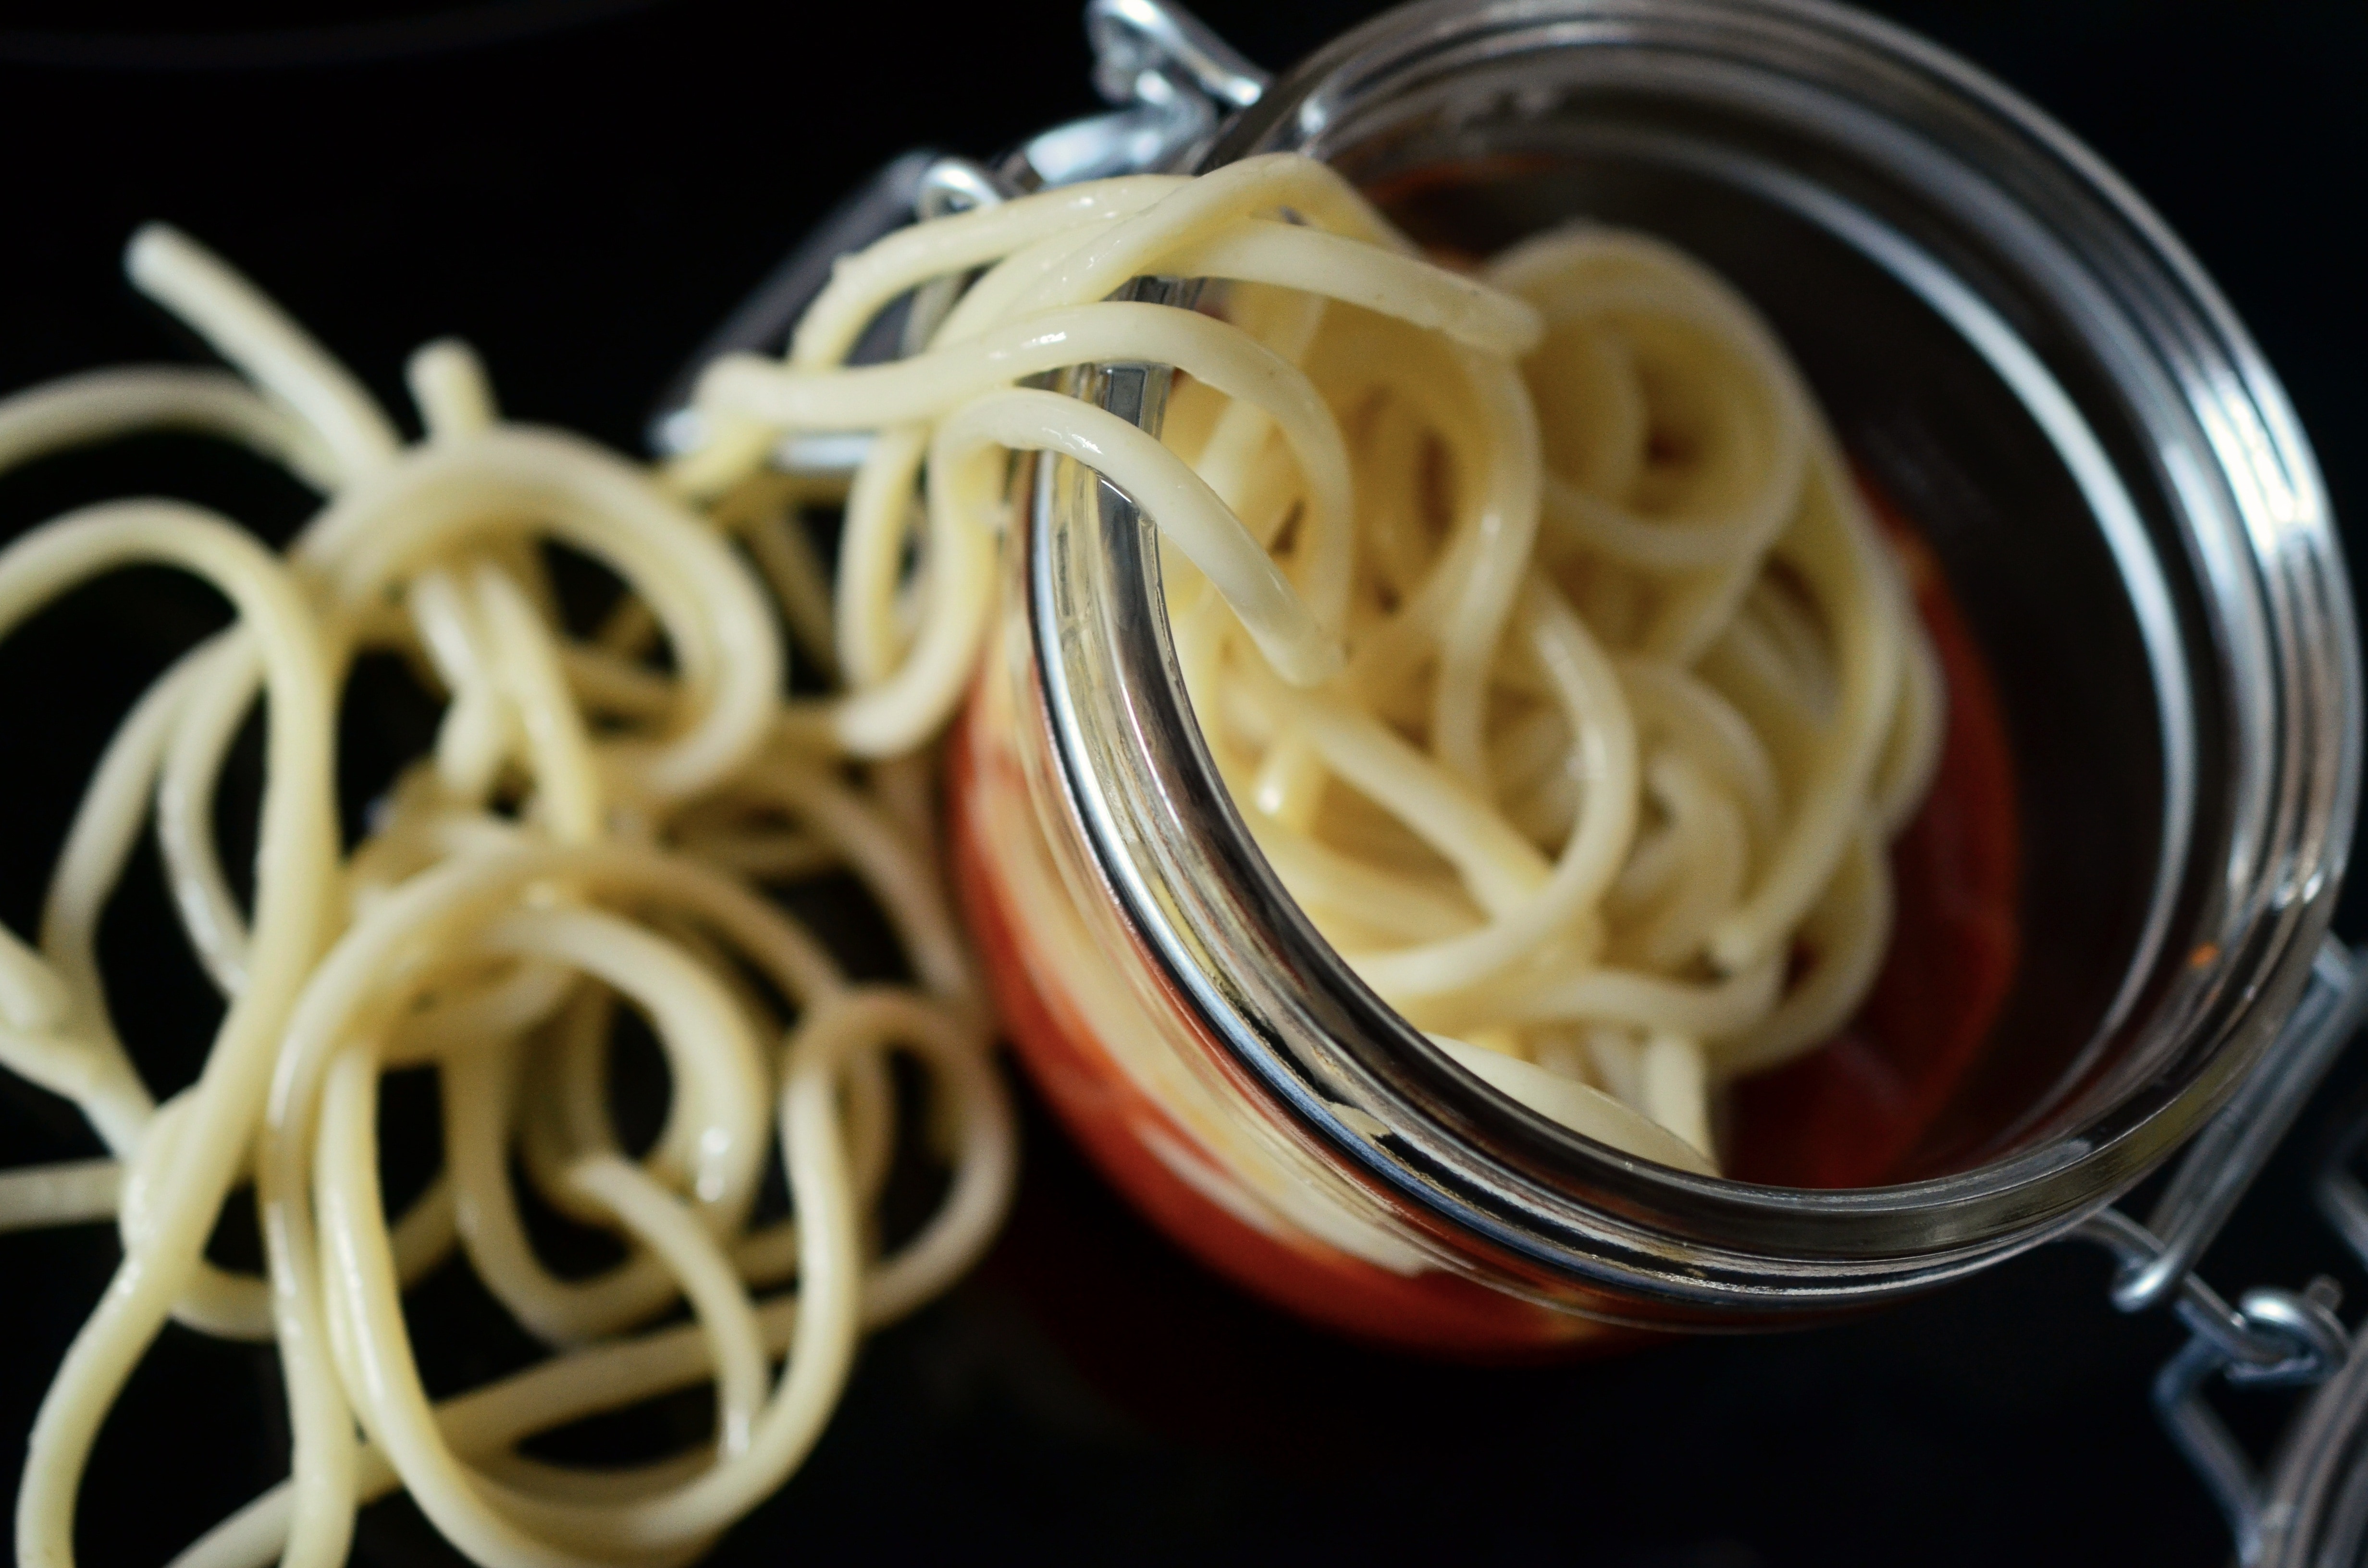 spaghetti noodles in a canister